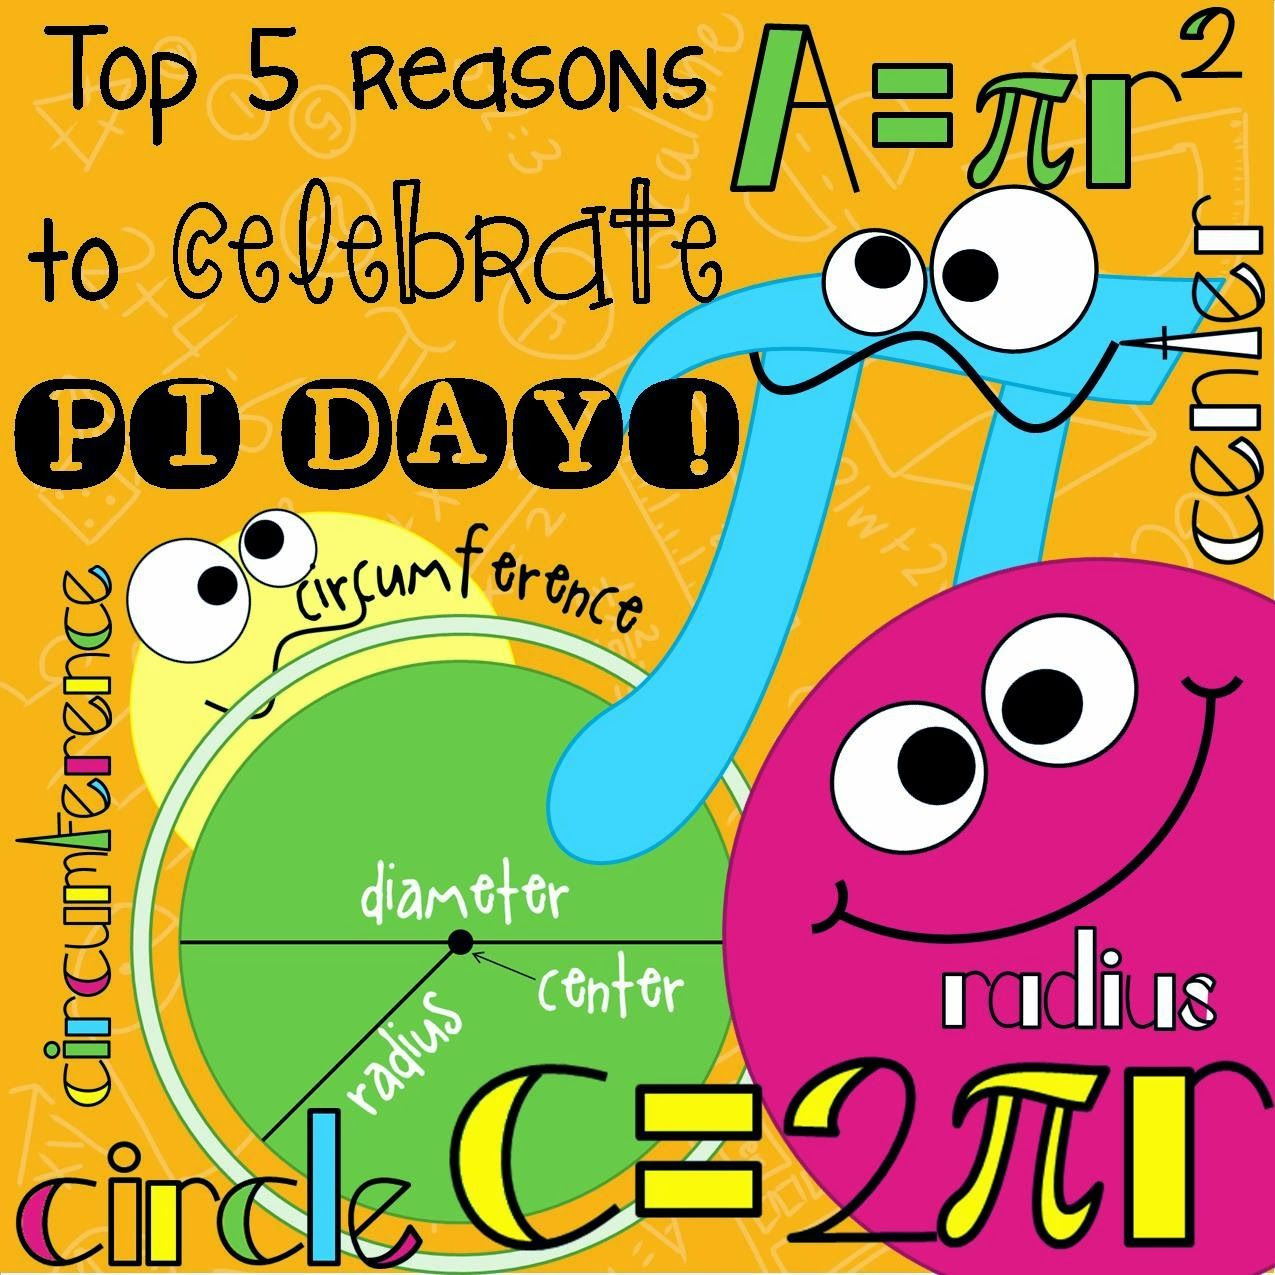 Pi Day Activities For Elementary School
 Top 5 Reasons to Celebrate PI DAY All Things Upper